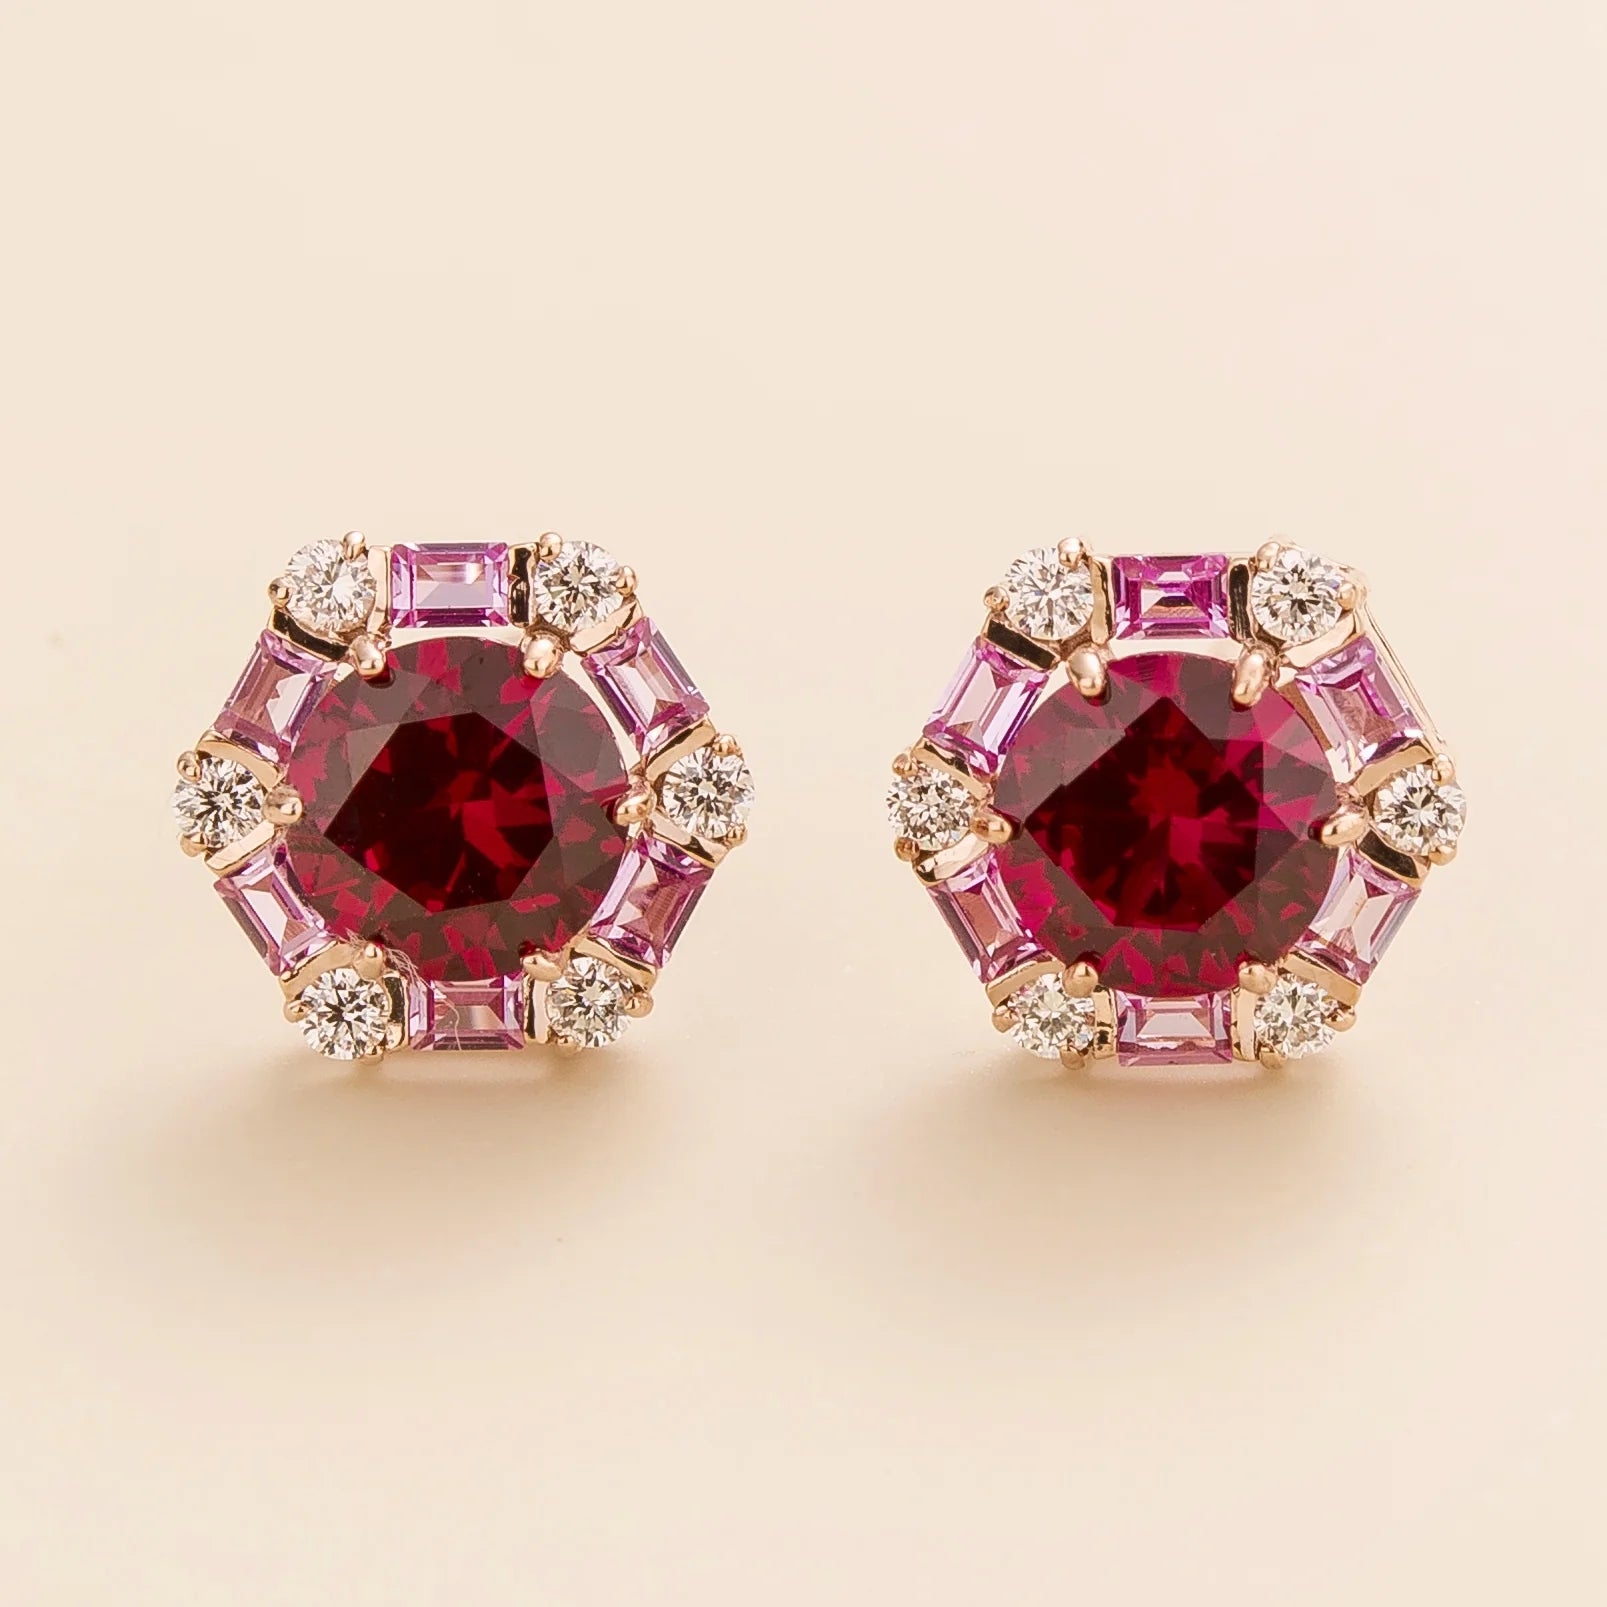 Melba Rose Gold Set With Ruby Pink Sapphire Earrings and Diamond From Bespoke Jewellery London